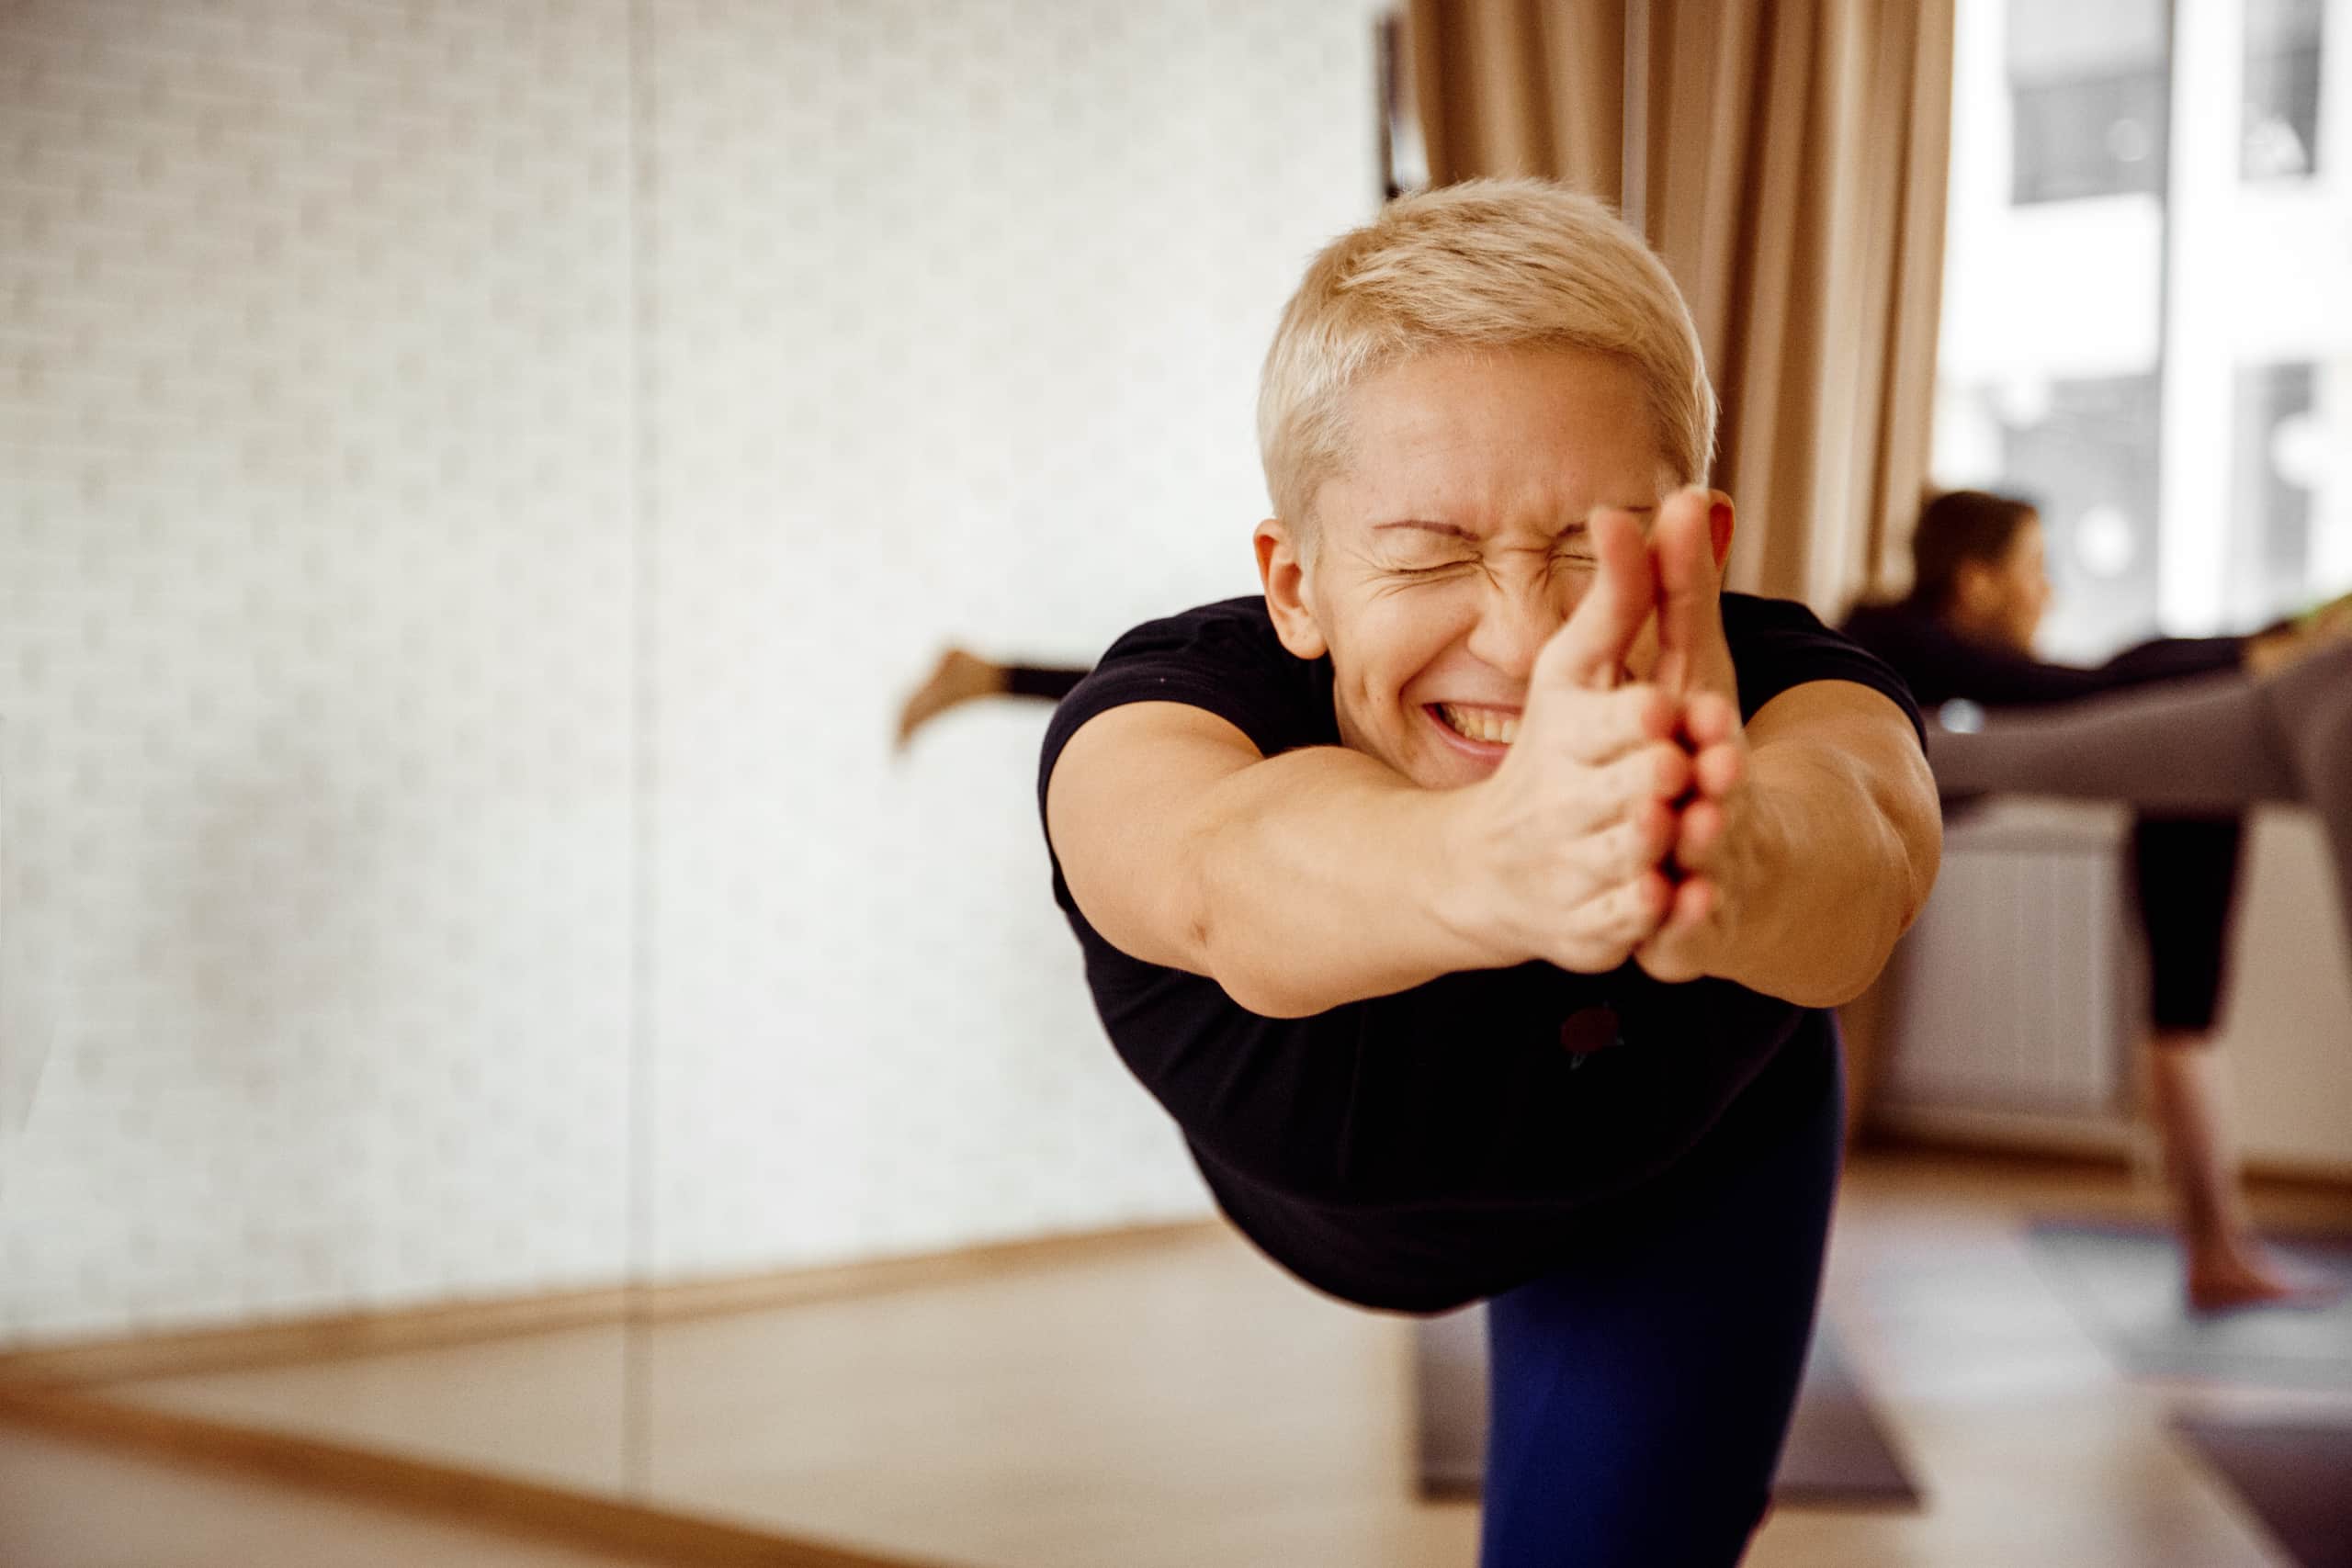 Pelvic Floor Physiotherapy allows woman to hold a harder yoga pose